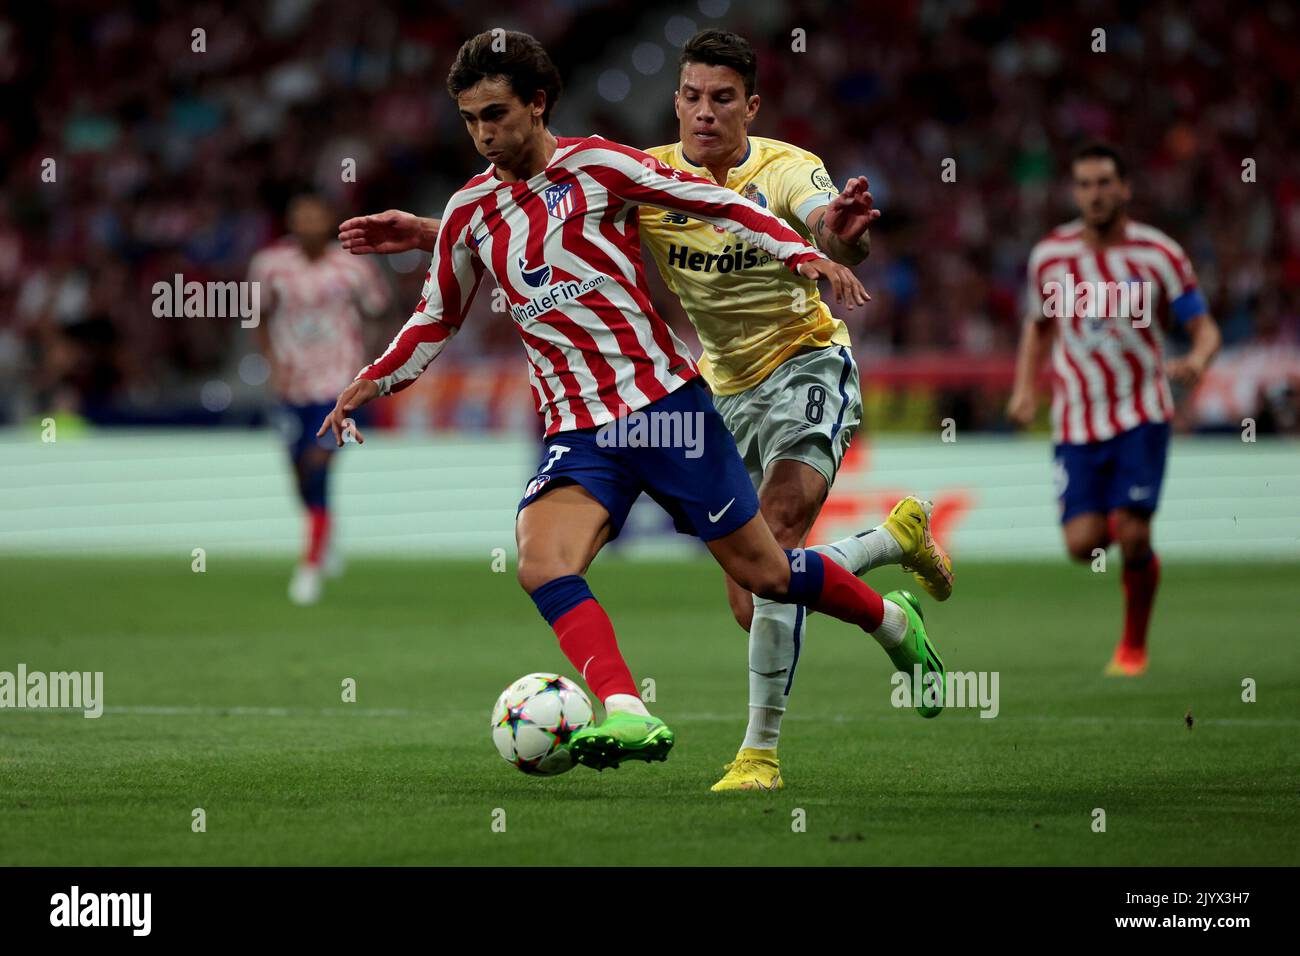 Madrid, Spanien. 07th Sep, 2022. Madrid, Spain: 07.09.2022.- Atletico player Joao Felix (L) and Porto player M. Uribe (R). Atletico de Madrid vs Porto Champions League group stage matchday 1 of 6. Held at the Civitas Metropolitano stadium in the Spanish capital. Atletico wins 2-1 goals from Mario Hermoso 90 1 and Antonie Griezmann 90 11  Porto goal scored by Mateus Uribe 90 6 (P) Credit: dpa/Alamy Live News Stock Photo